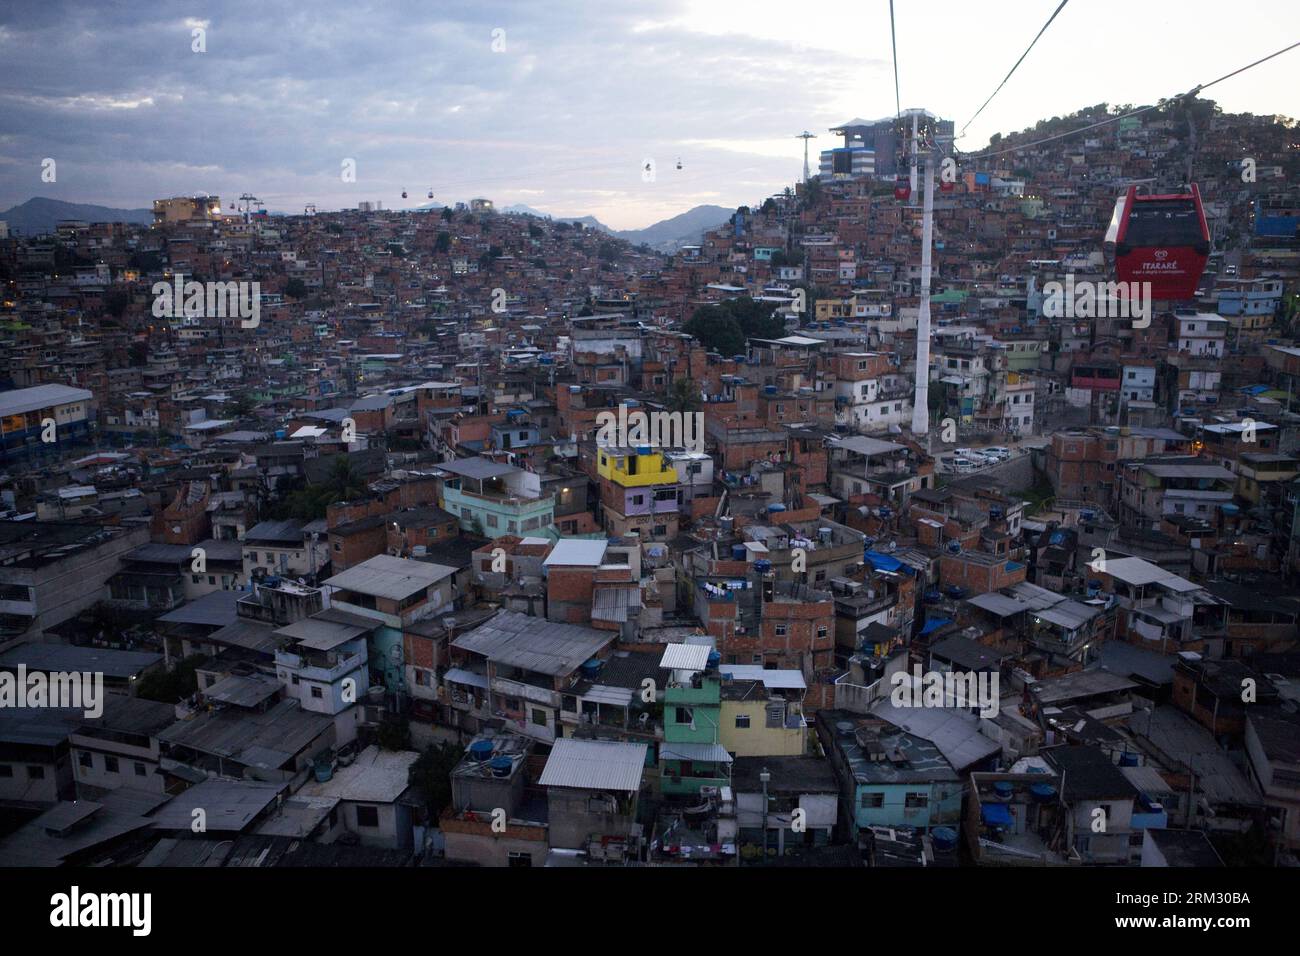 Bildnummer: 59922701  Datum: 30.06.2013  Copyright: imago/Xinhua (130630) -- RIO DE JANEIRO, June 30, 2013 (Xinhua) -- Citizens are transported in a cableway in the favela (slum) Complexo do Alemao, in Rio de Janeiro, Brazil, on June 29, 2013. Brazil will face Spain on Sunday during the final of the FIFA s Confederations Cup Brazil 2013. (Xinhua/Guillermo Arias) (tm) (SP)BRAZIL-RIO DE JANEIRO-FAVELA-SERIES PUBLICATIONxNOTxINxCHN Gesellschaft x2x xst 2013 quer Highlight o0 Seilbahn gondel Totale Landschaft     59922701 Date 30 06 2013 Copyright Imago XINHUA  Rio de Janeiro June 30 2013 XINHUA C Stock Photo